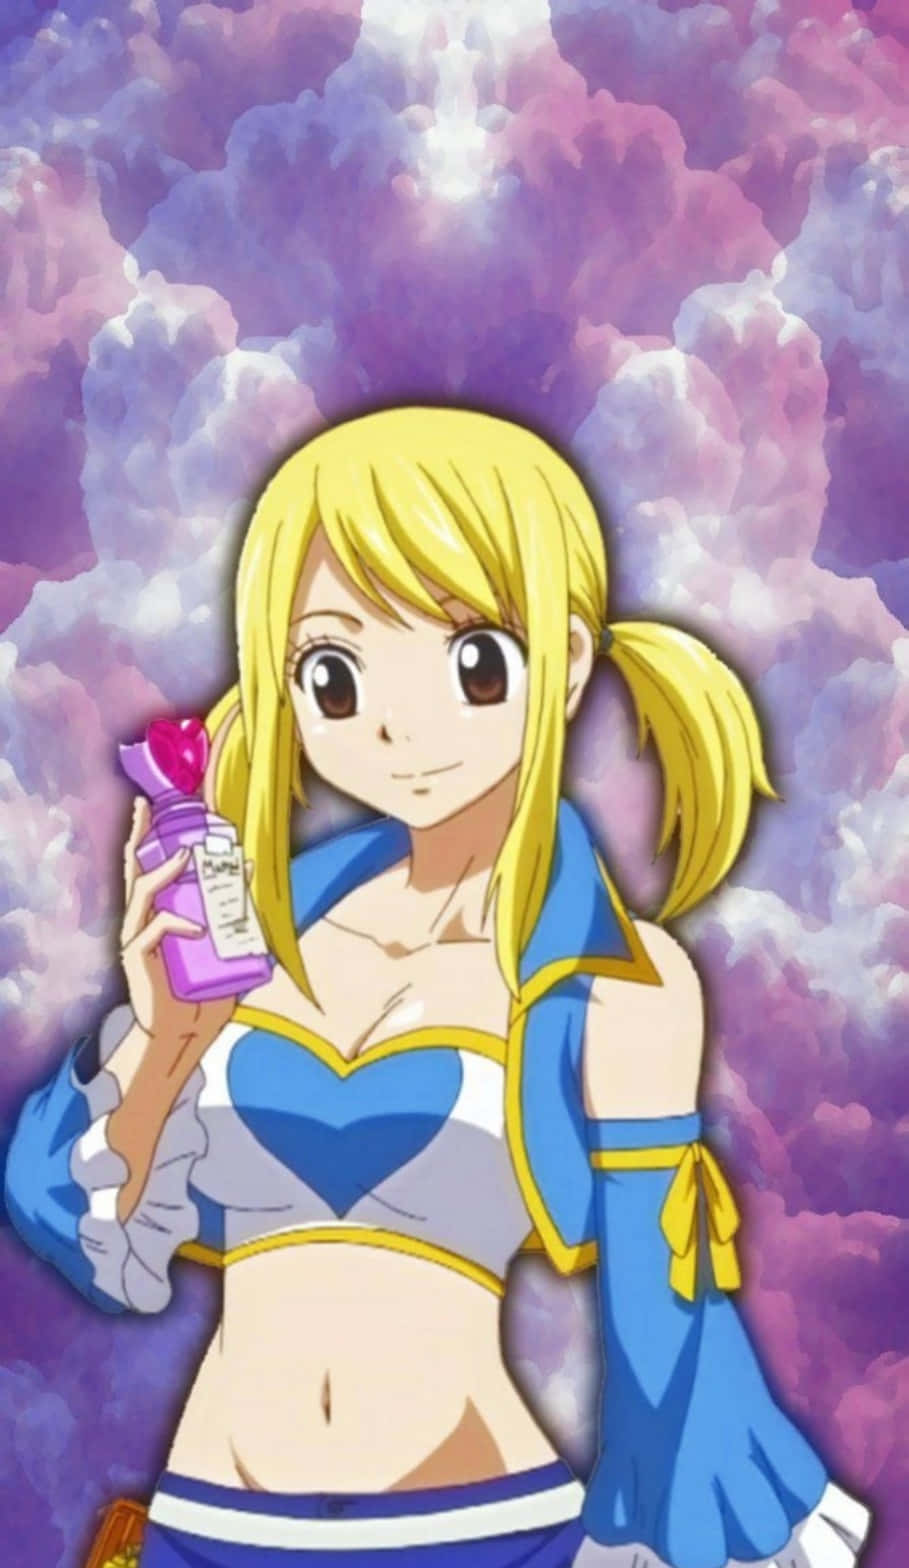 Fairy Tail Iphone-skal Med Lucy Heartfilia. Wallpaper